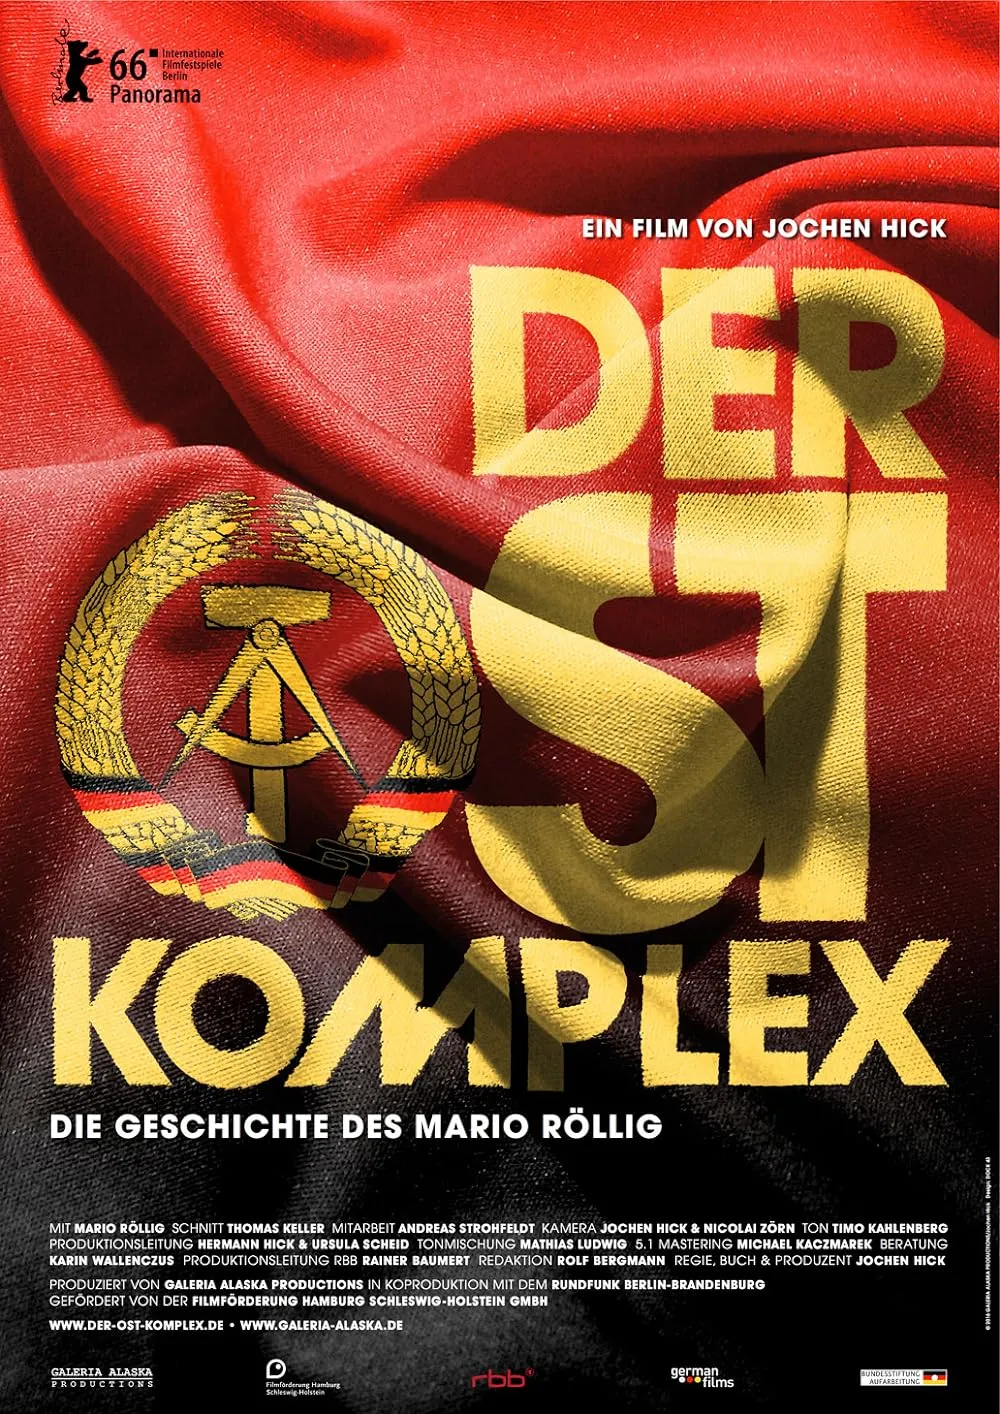     The GDR Complex